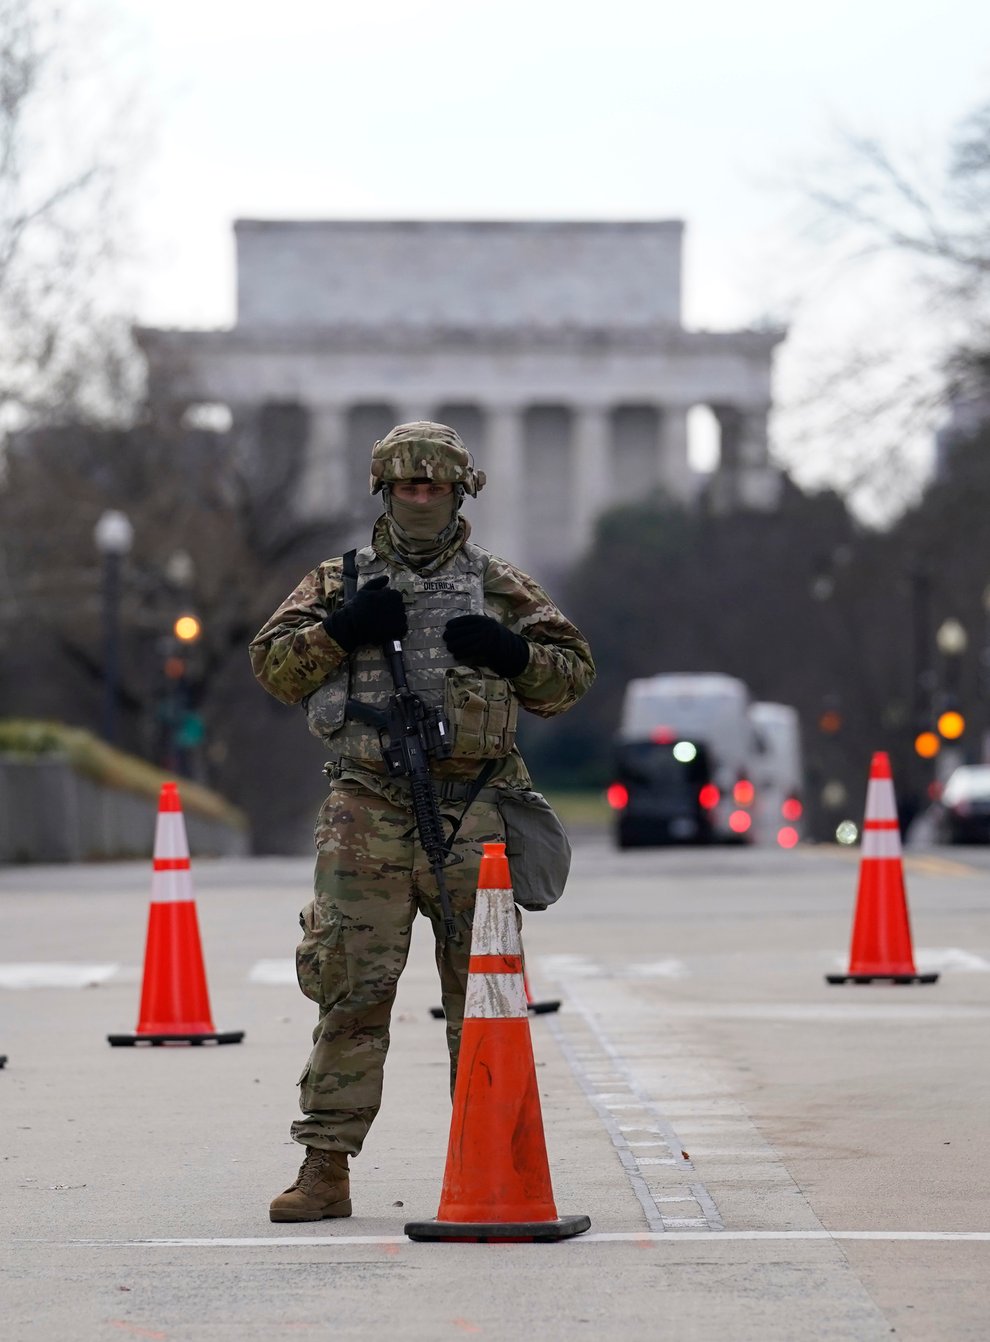 A National Guardsman stands near the US Supreme Court